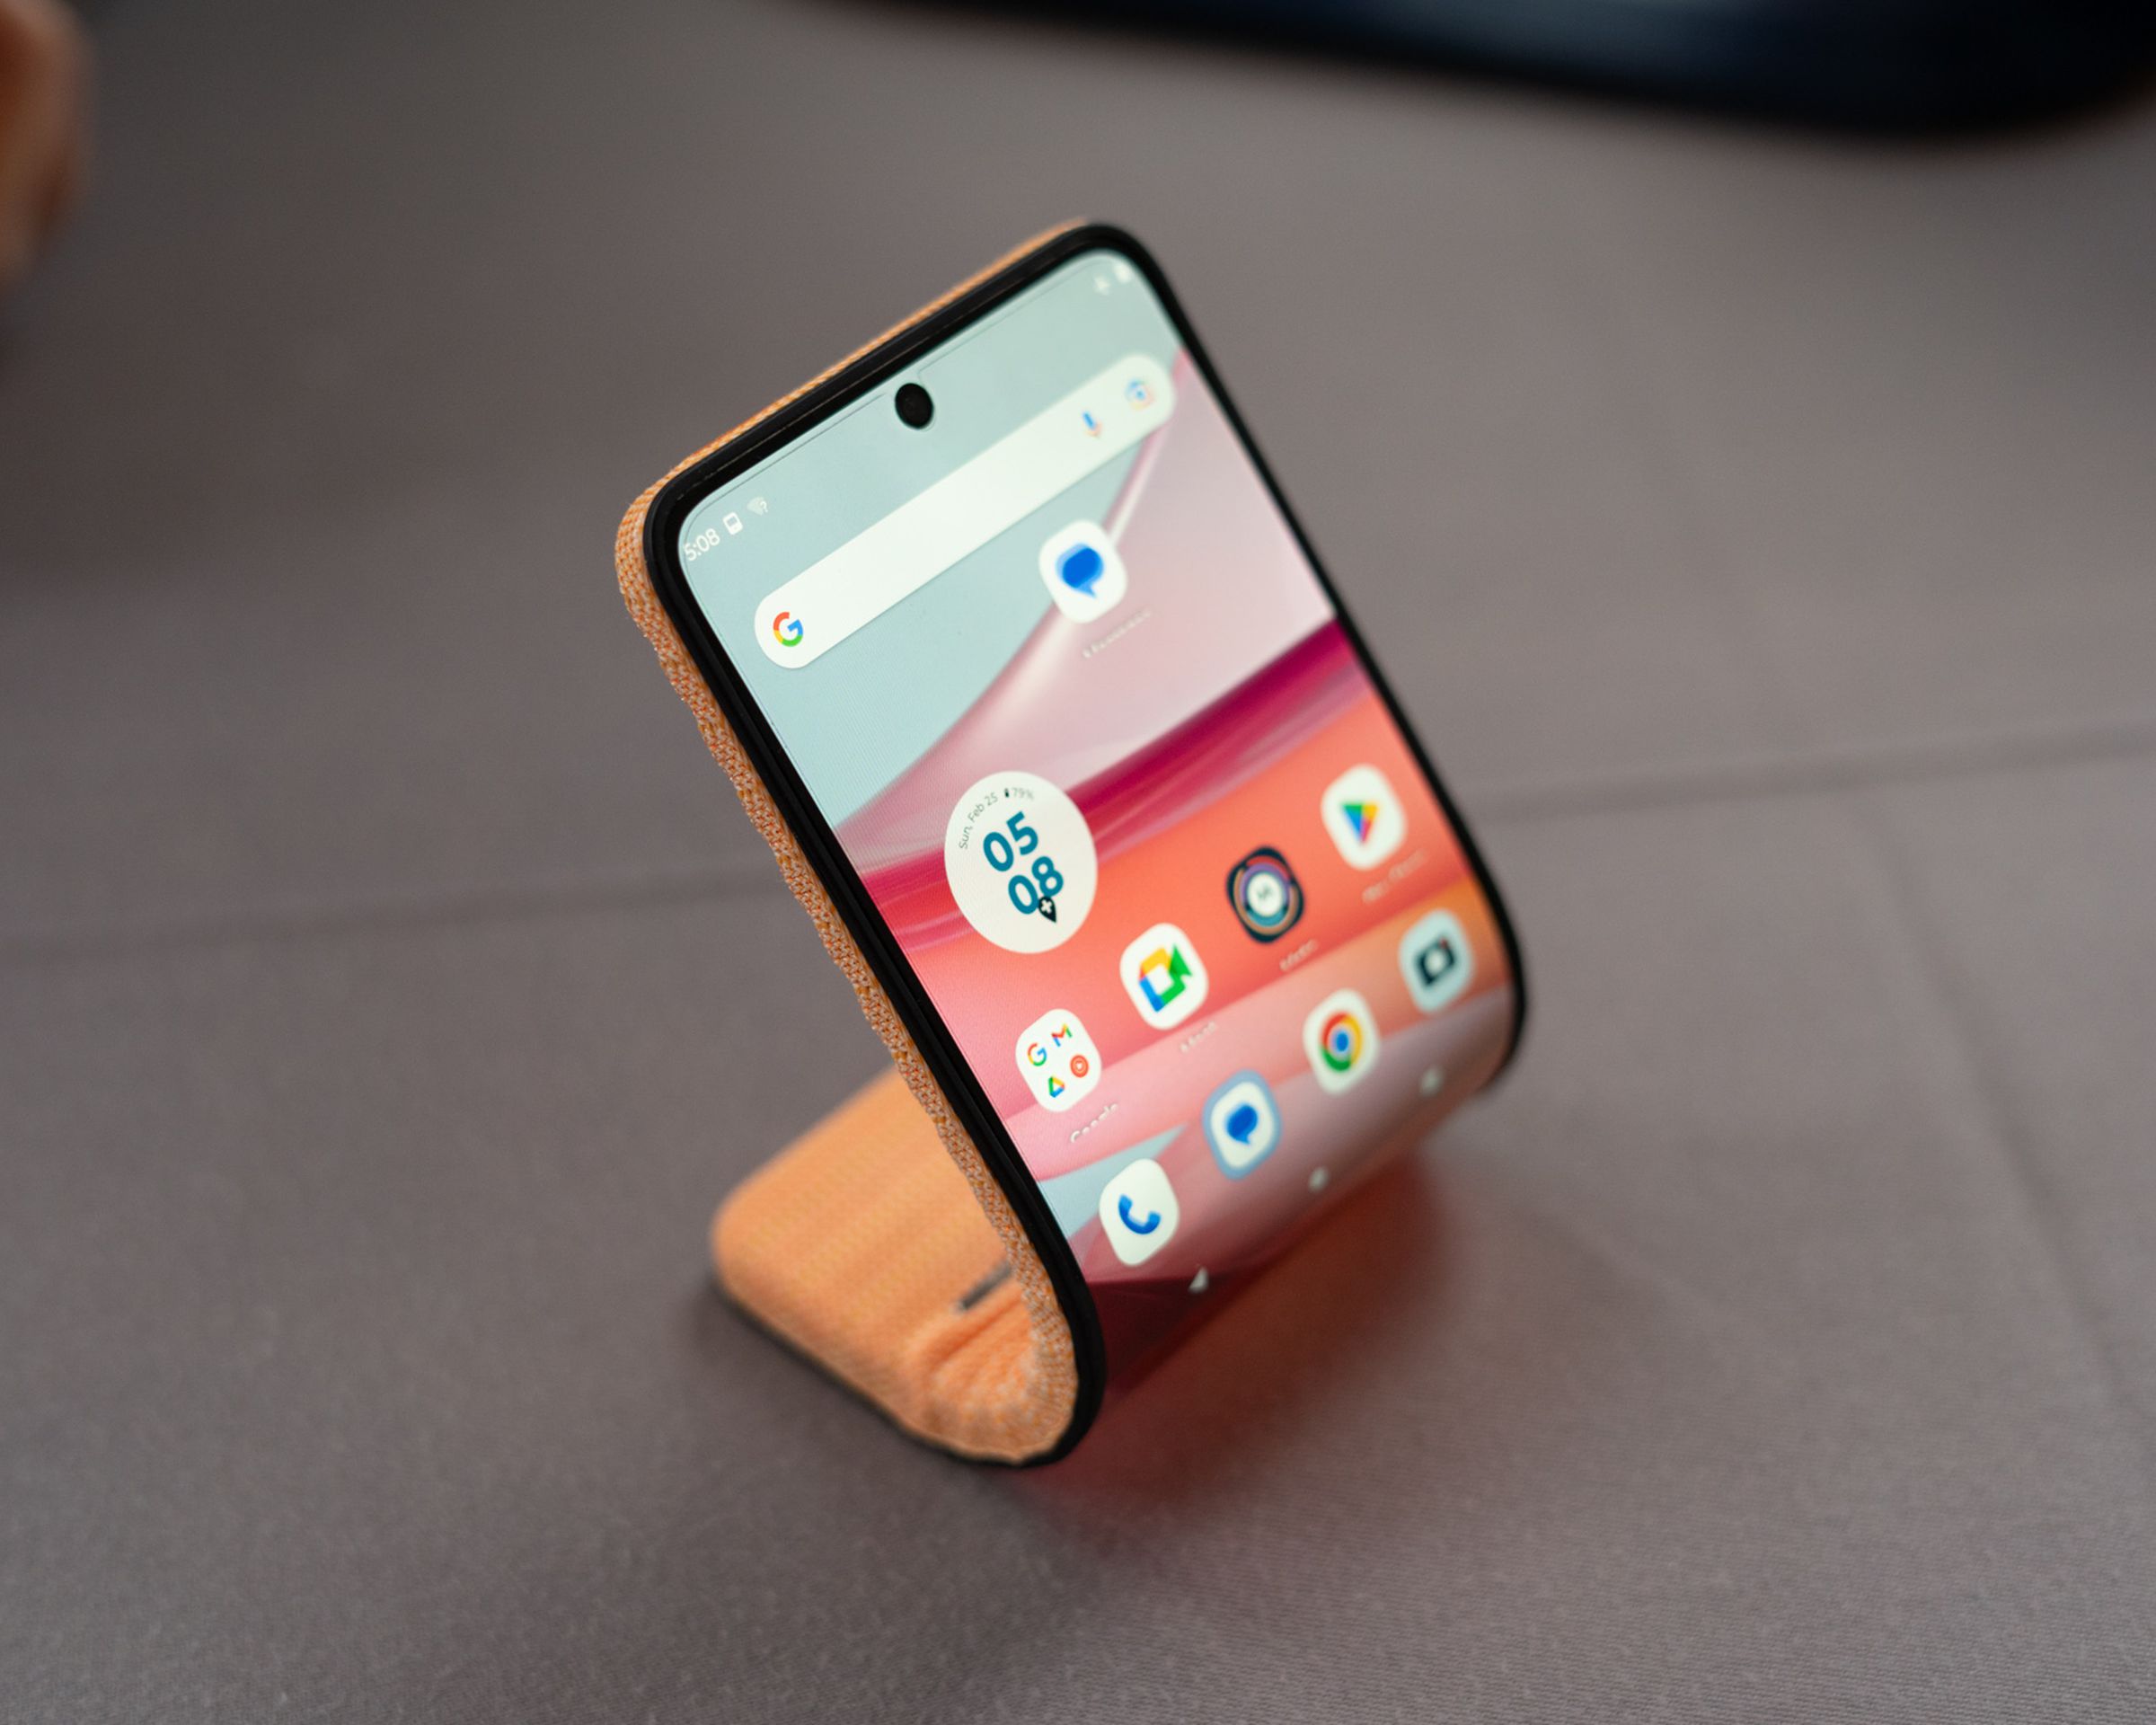 Motorola’s bending phone concept, curved and sitting on a table.